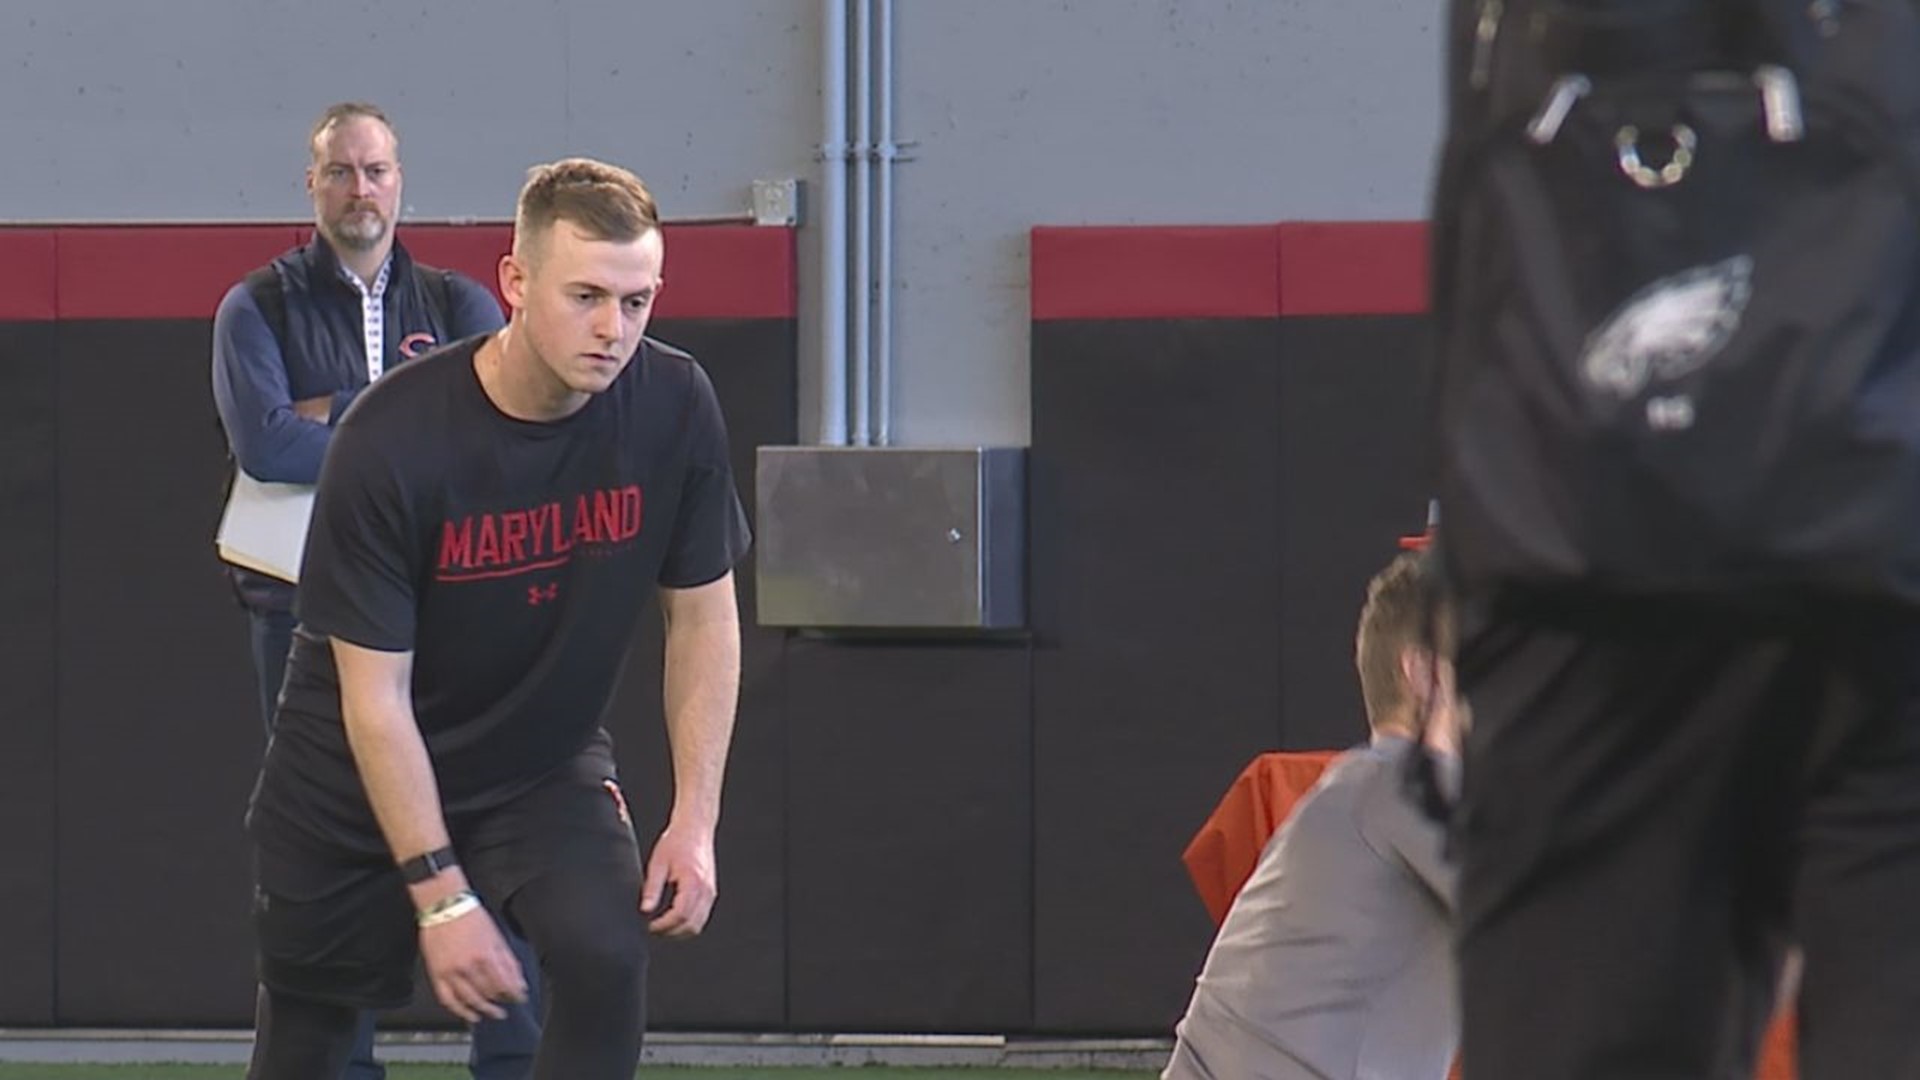 The Lebanon County native is seen as the top kicker in the 2023 NFL Draft.